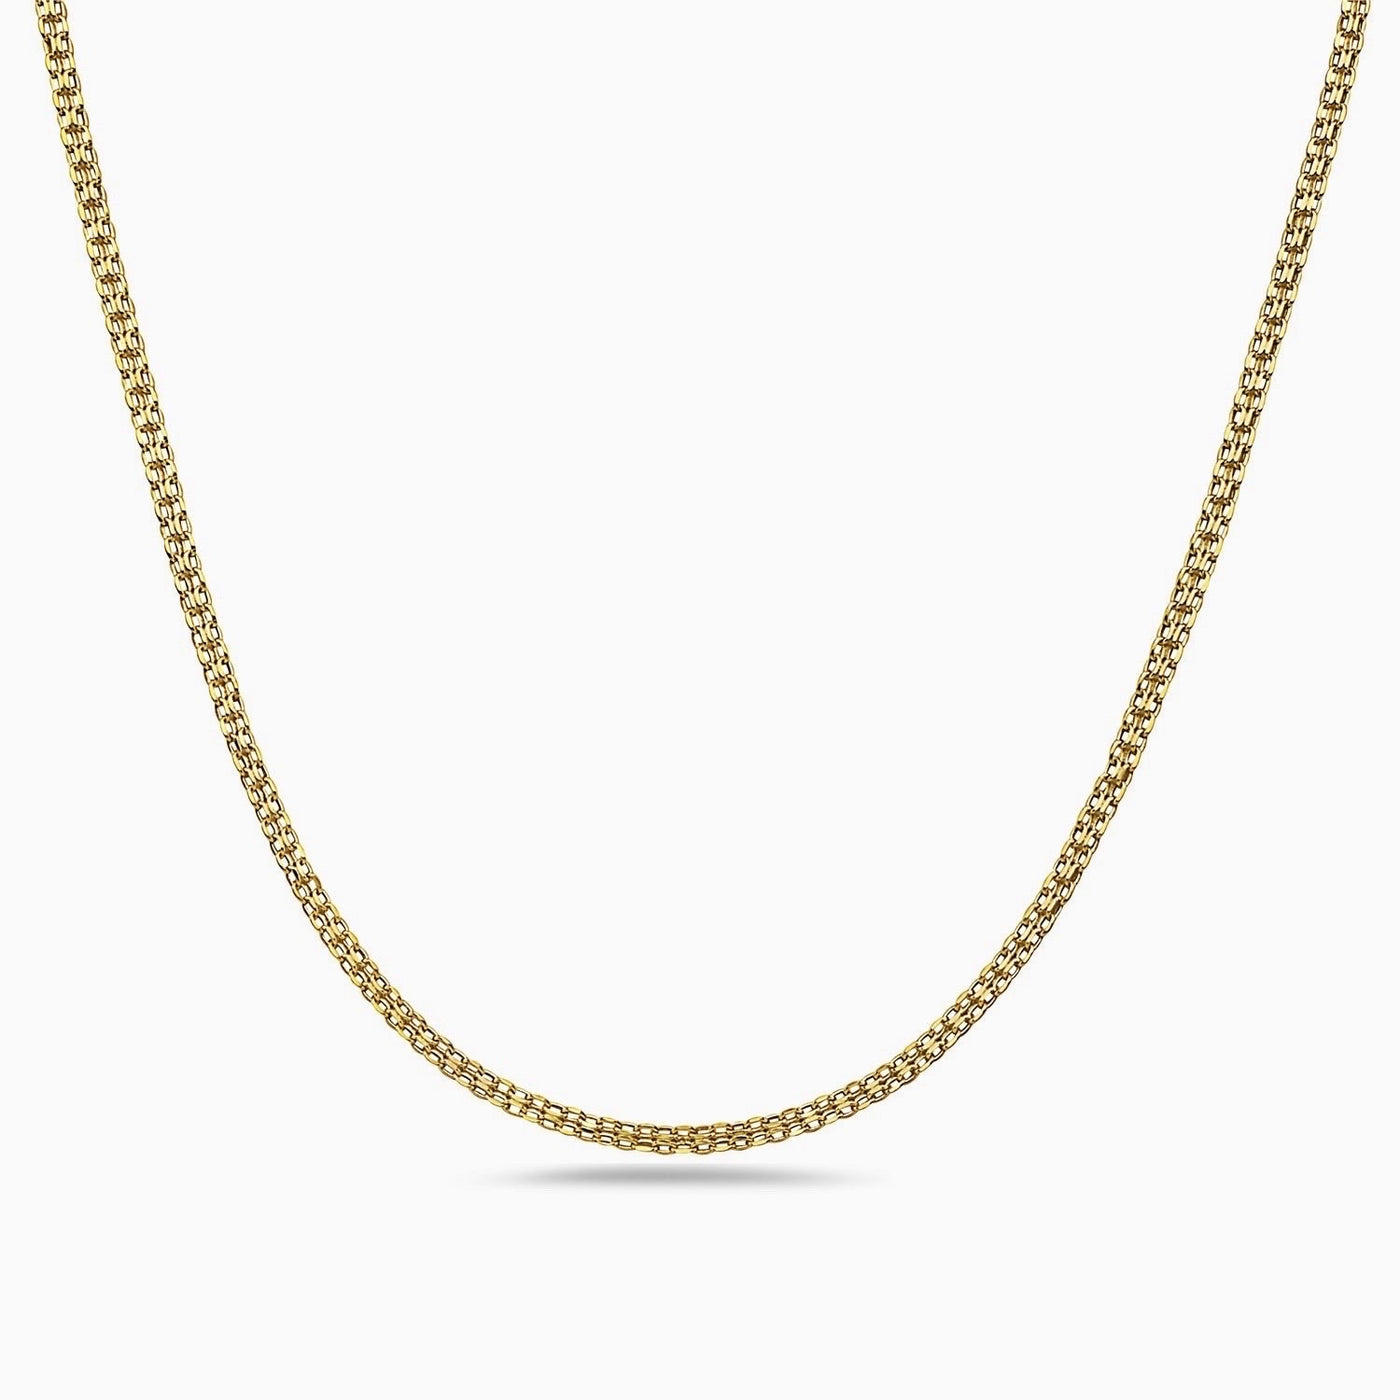 10K Gold Thick Bismarck Chain Necklace